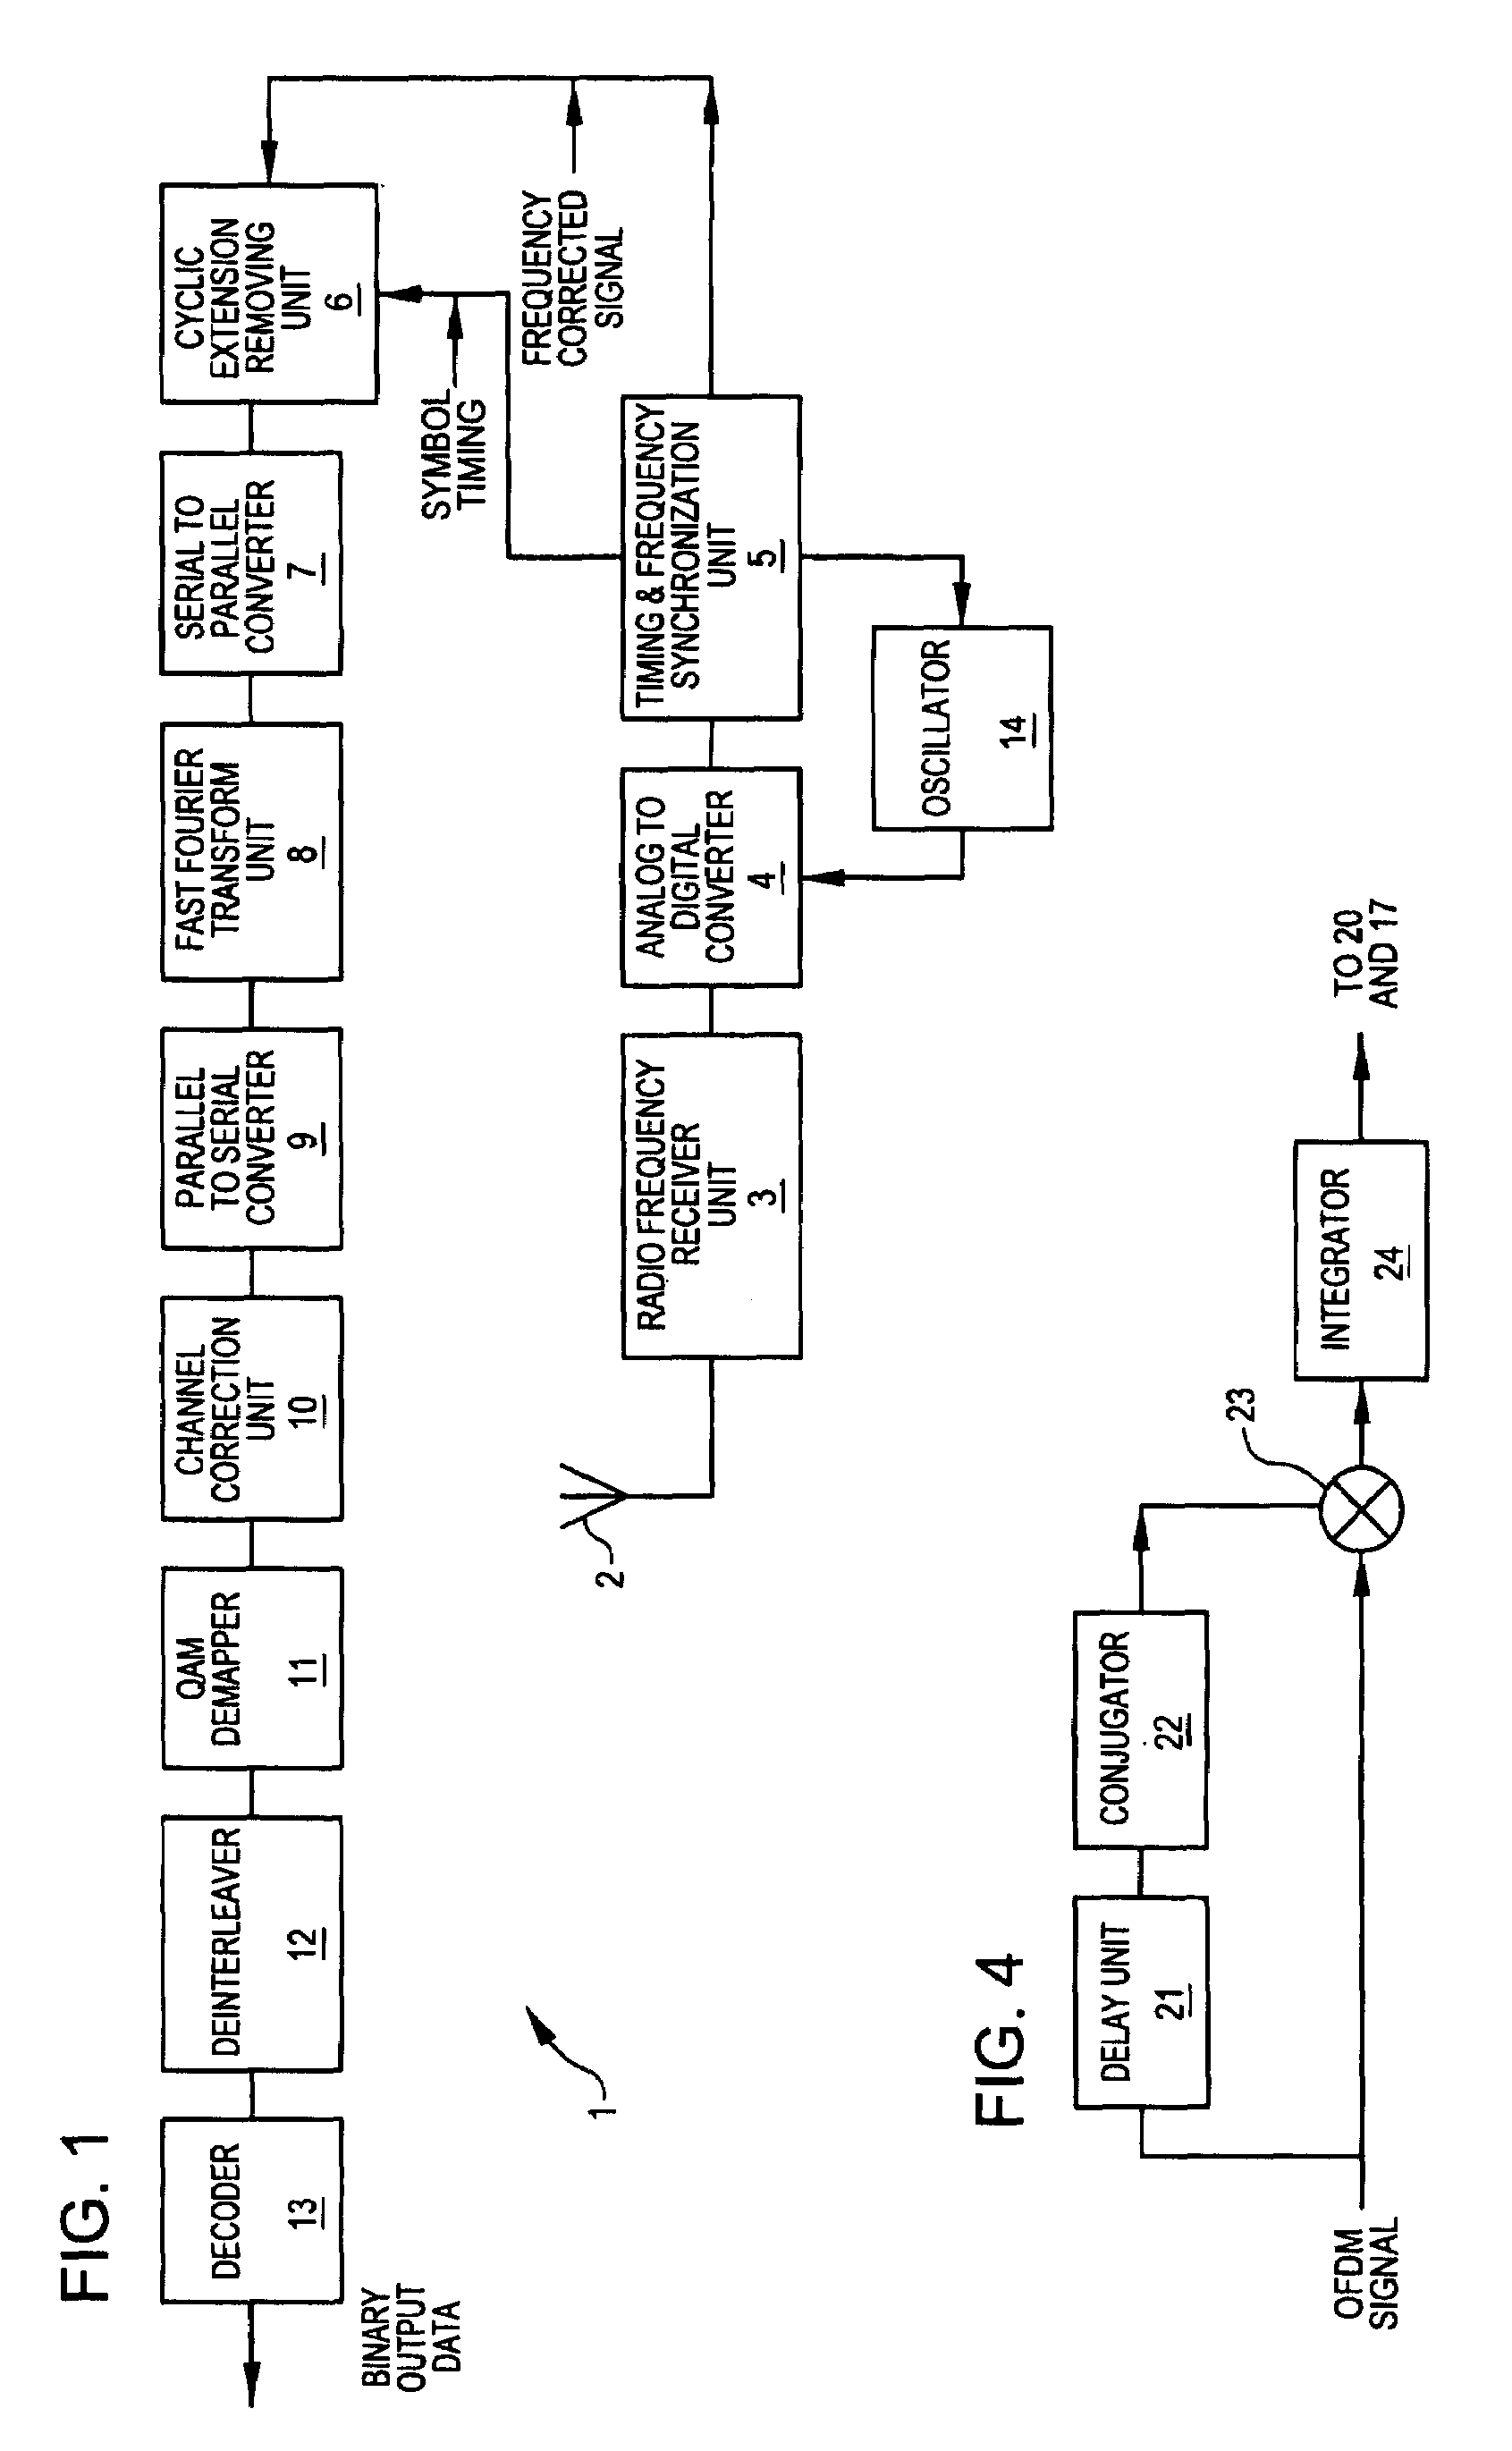 Methods and apparatus for synchronization of training sequences